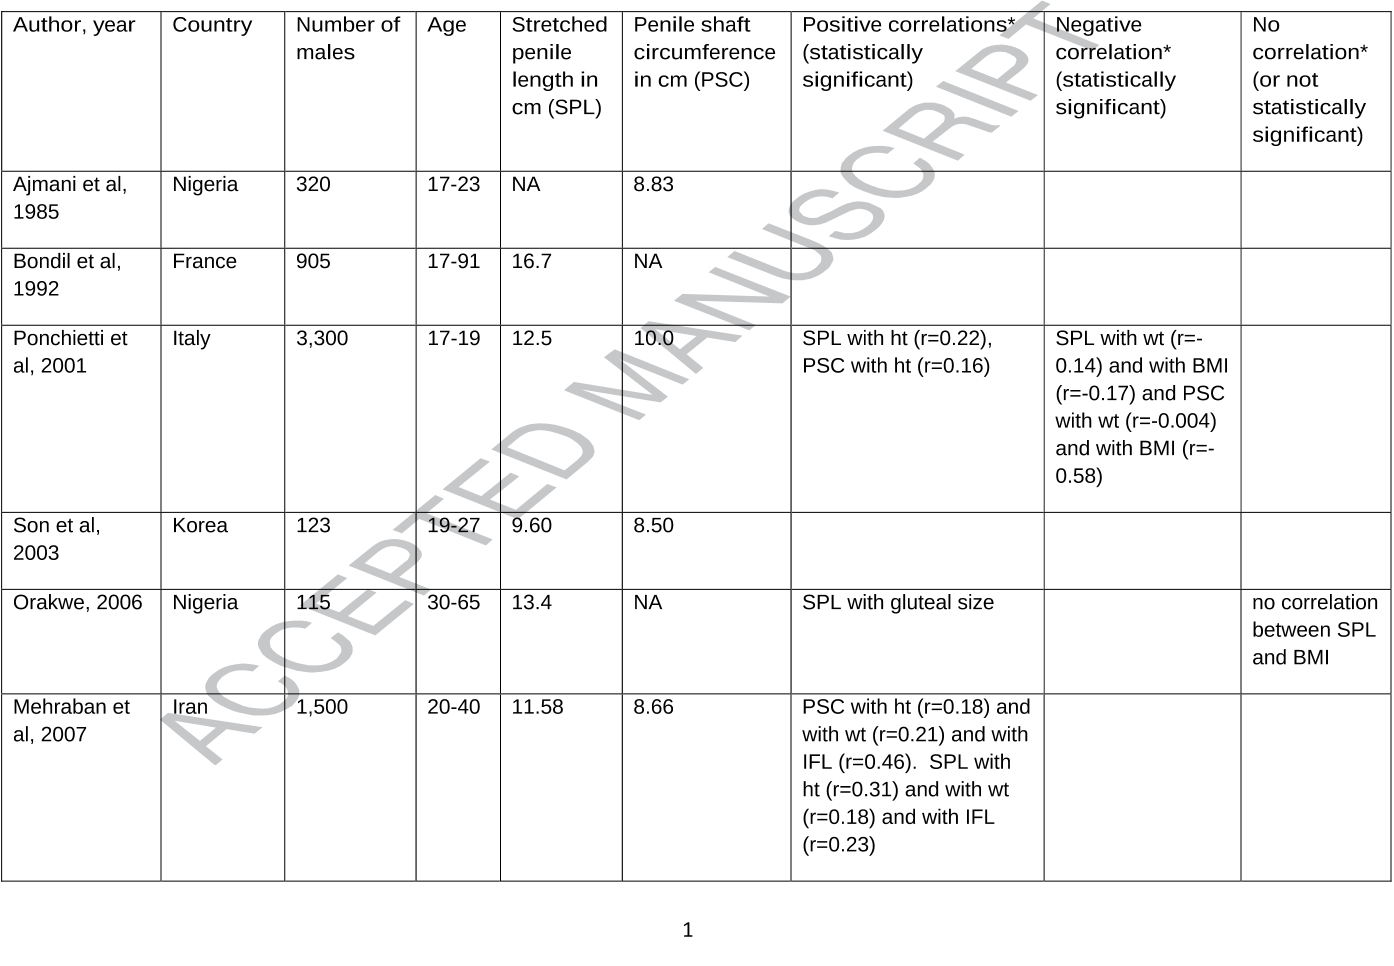 Table 1. Summary of selected literature on penile measurements and correlations